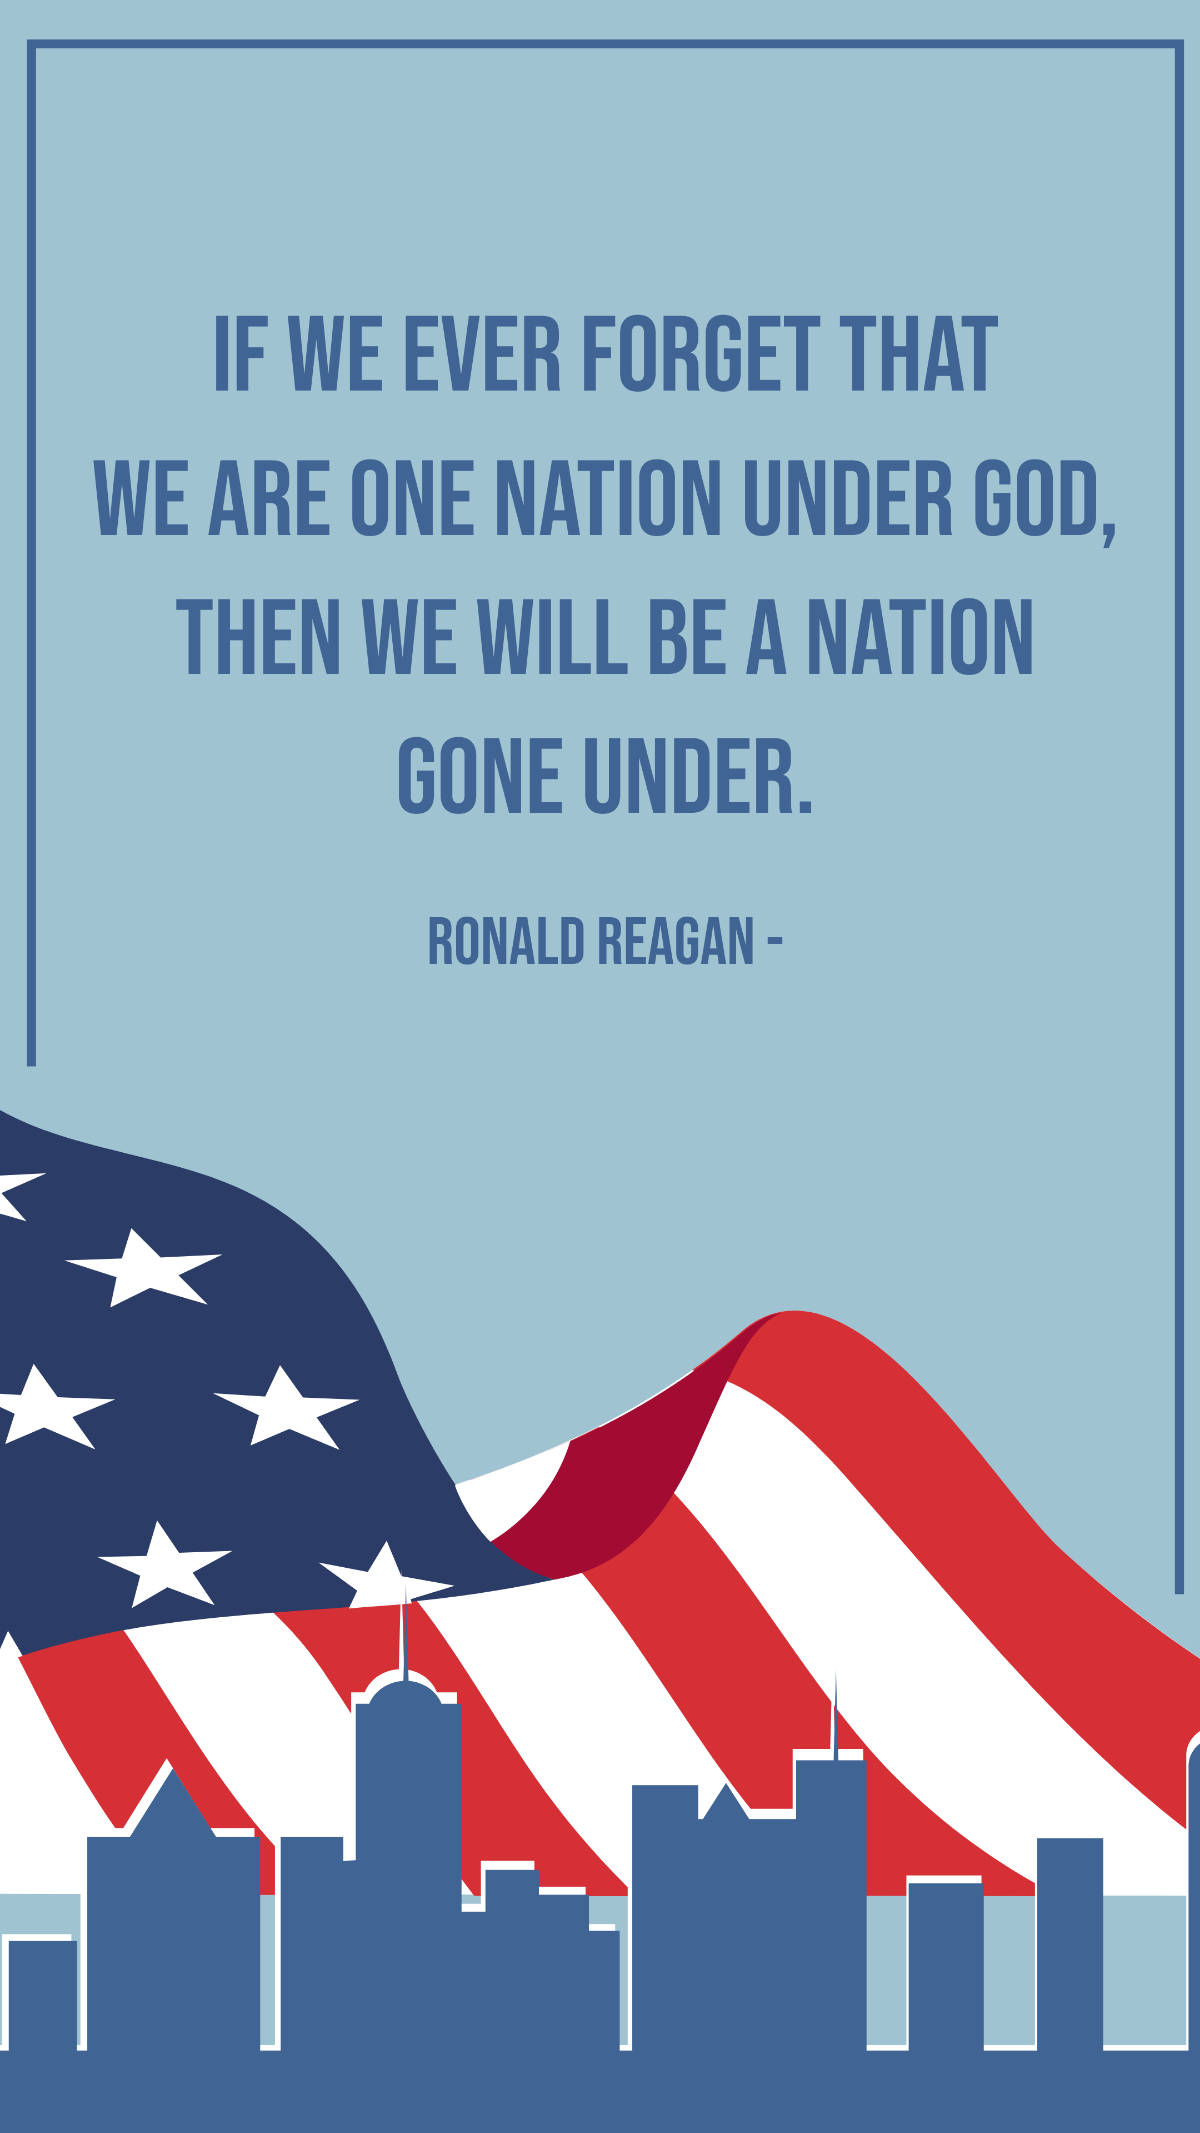 Ronald Reagan - If we ever forget that we are One Nation Under God, then we will be a nation gone under. Template